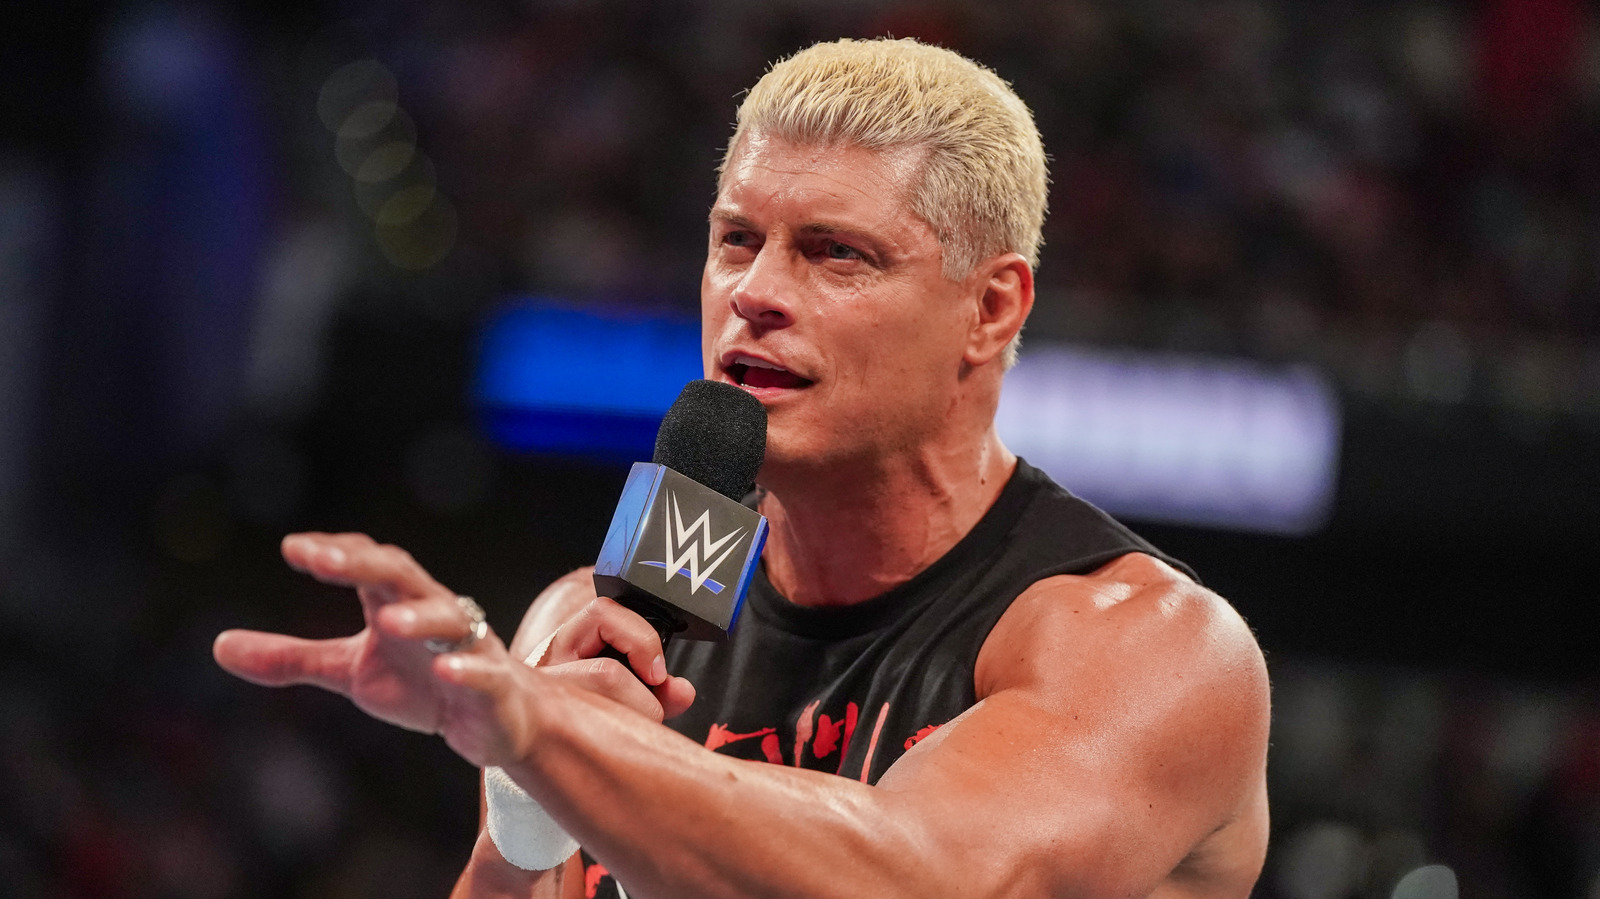 Cody Rhodes Comments On Emotional Madison Square Garden Moment With Classic WWE Title